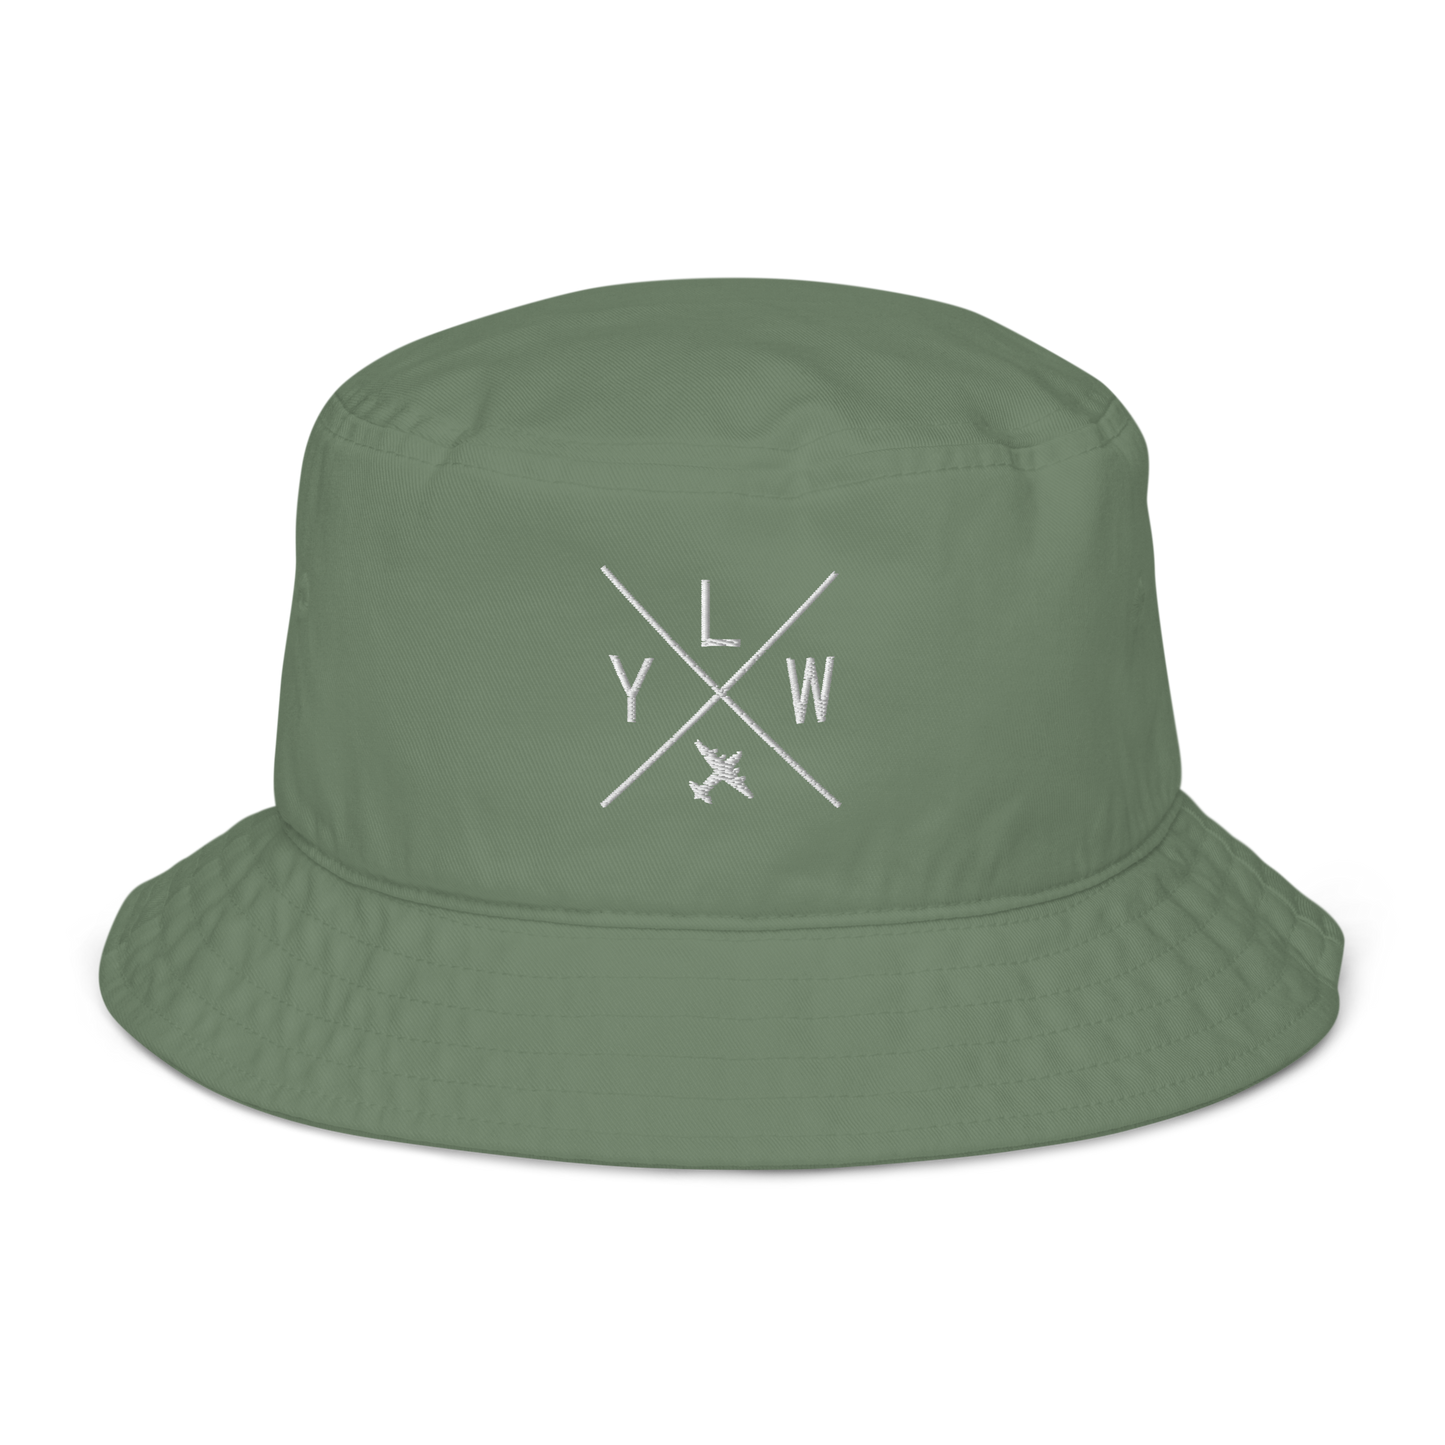 YHM Designs - YLW Kelowna Organic Cotton Bucket Hat - Crossed-X Design with Airport Code and Vintage Propliner - White Embroidery - Image 06